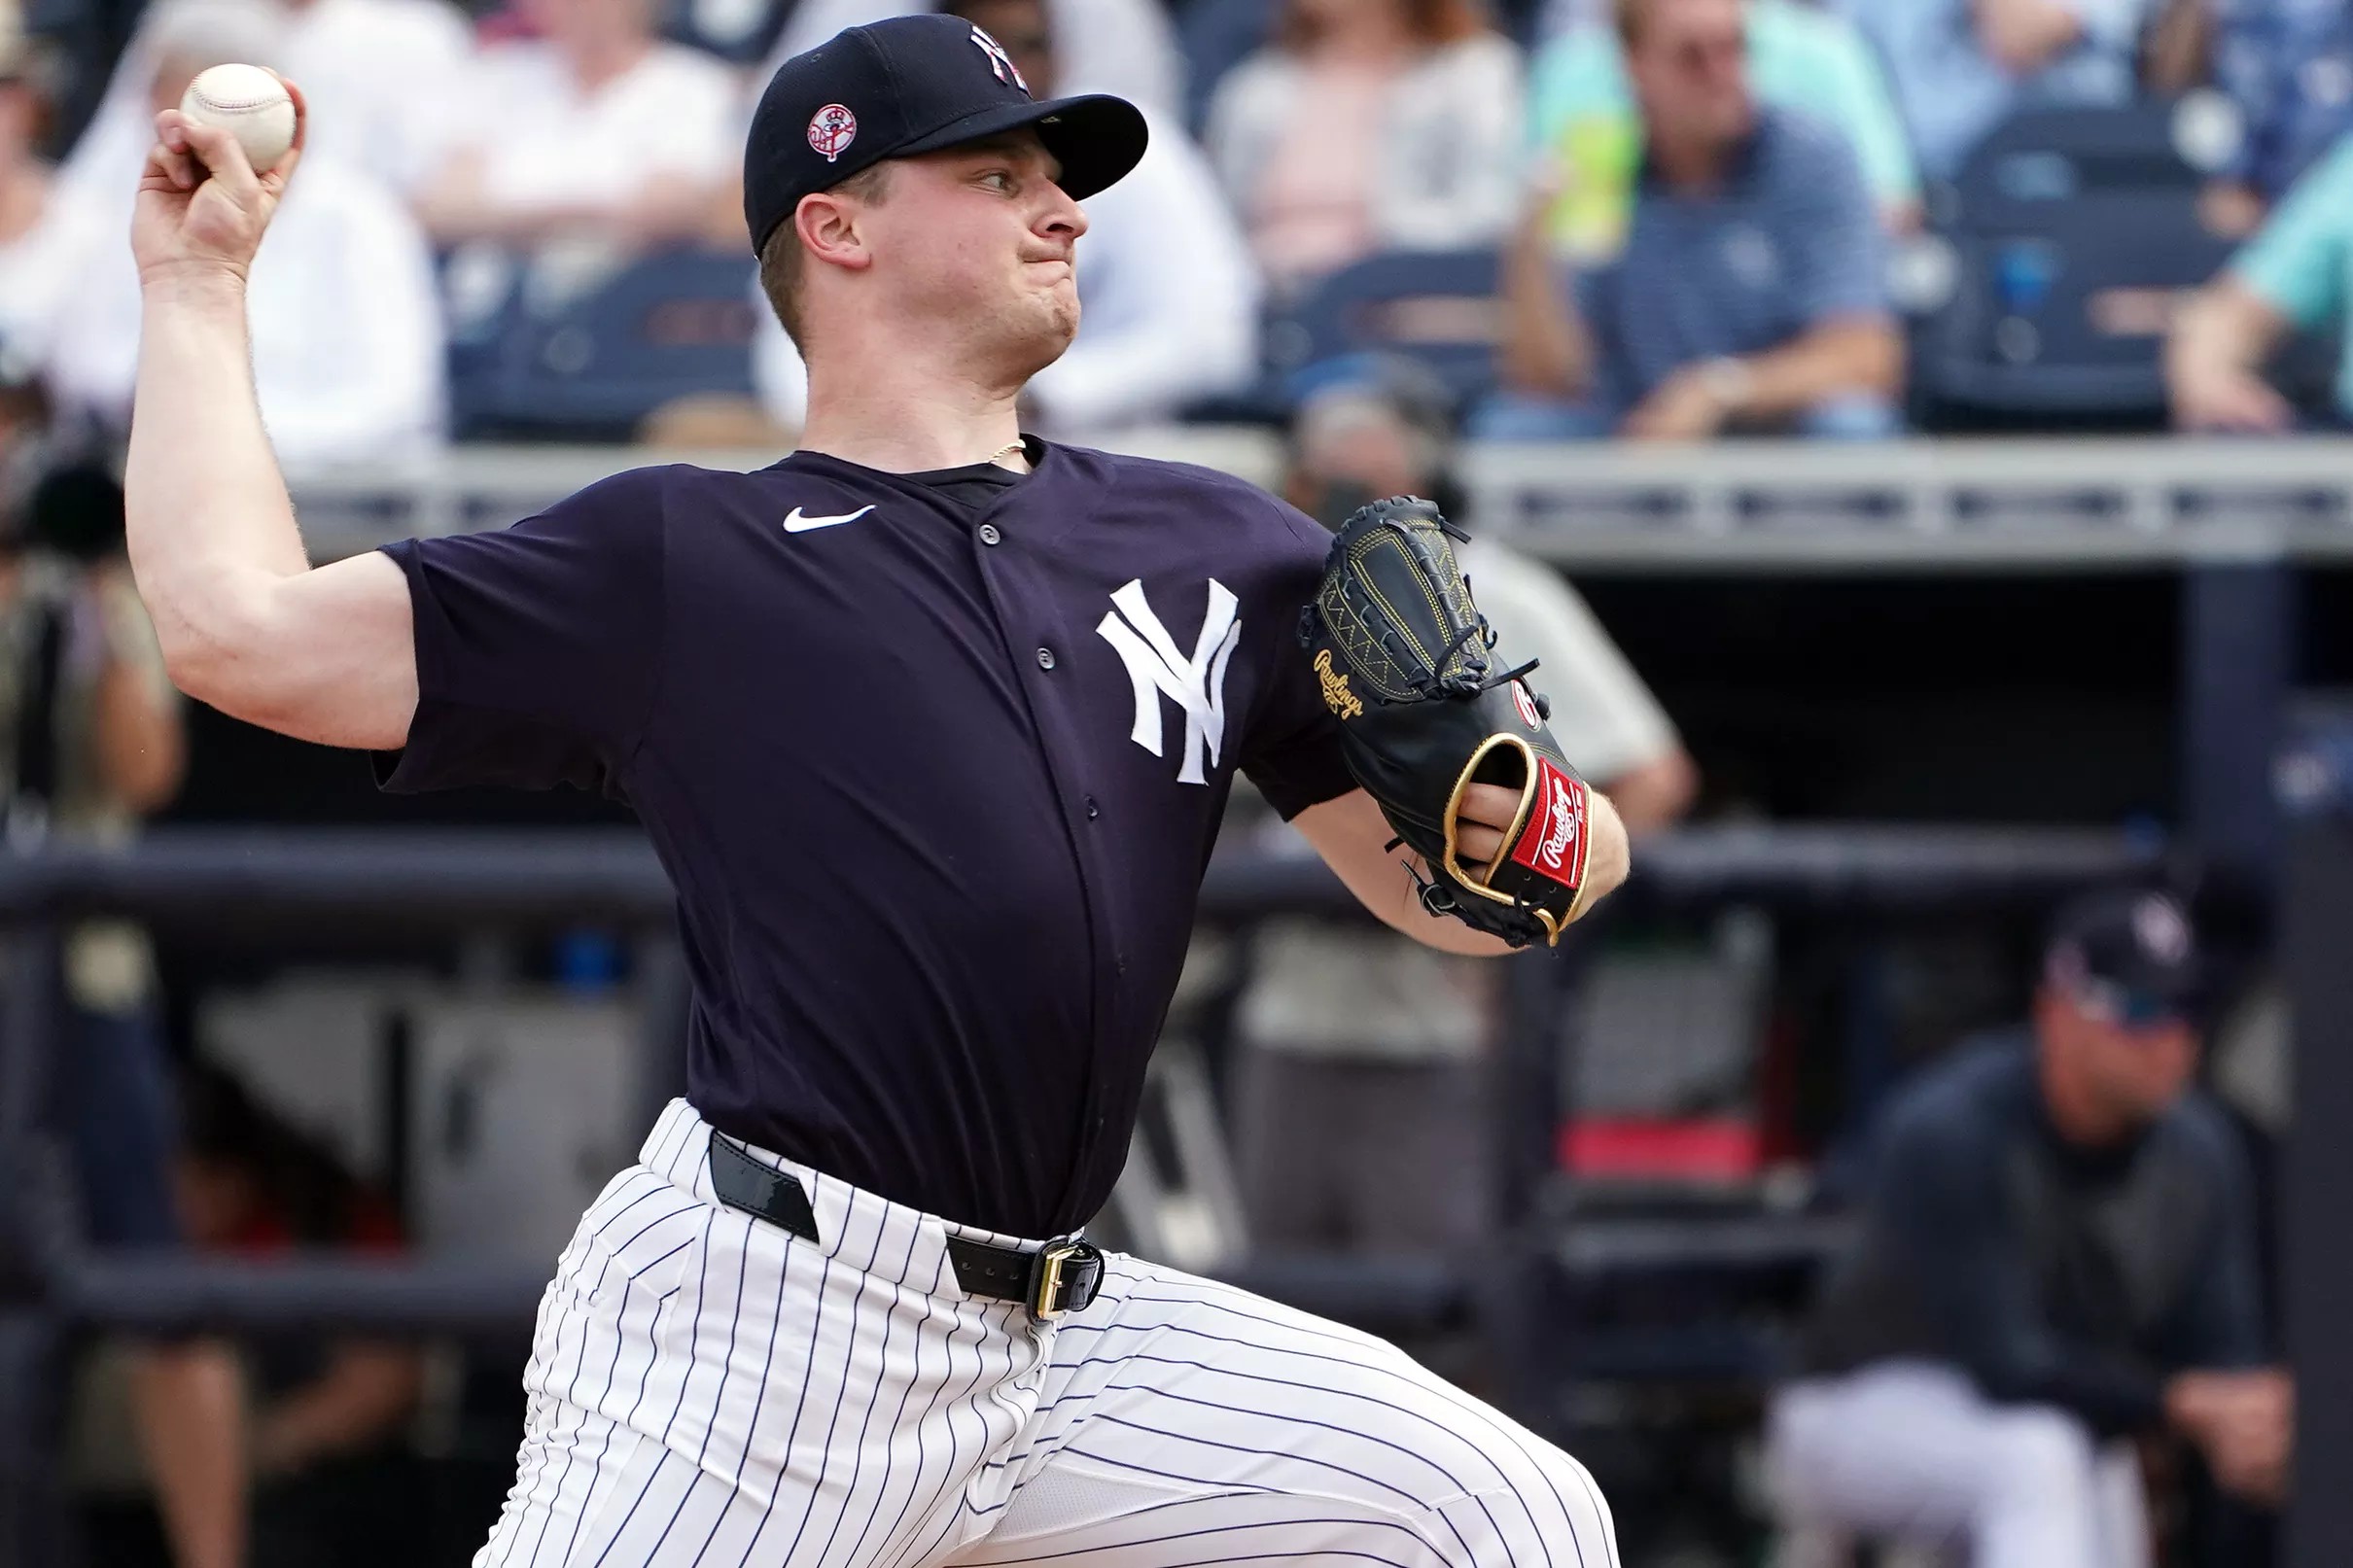 Spotting the spring’s most impressive young pitchers for the Yankees